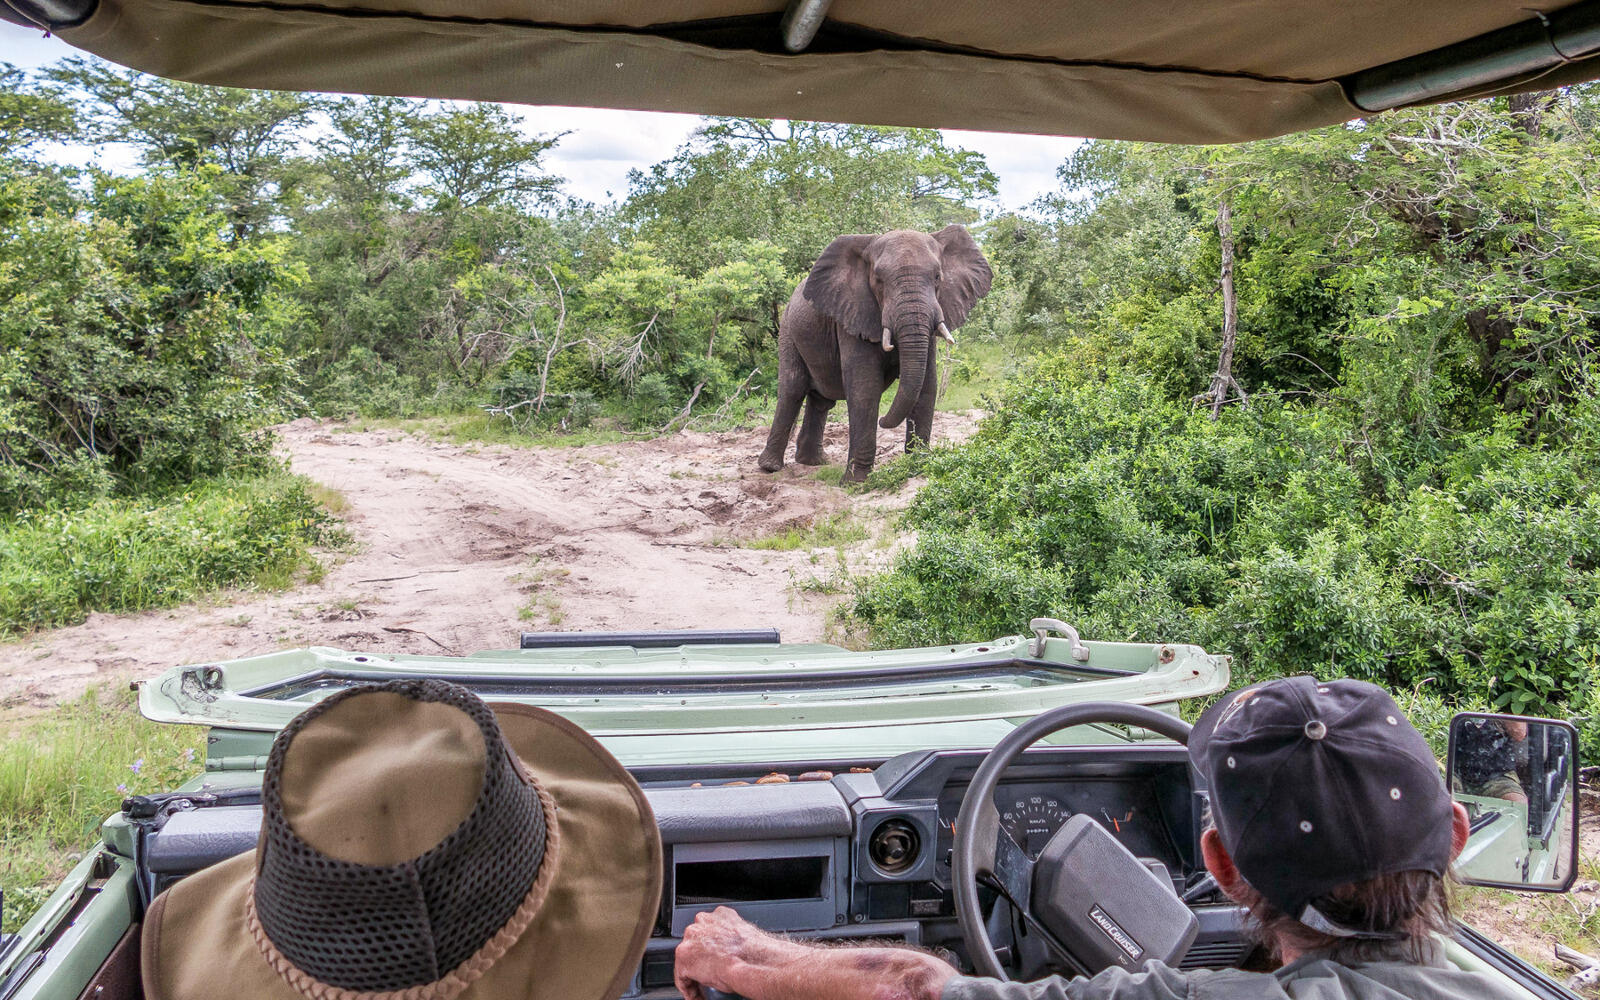 Summits to Seas students spot an elephant at the Tembe Elephant Park in Maputaland, KwaZulu-Natal, South Africa.
<br>Photo by James Vonesh.